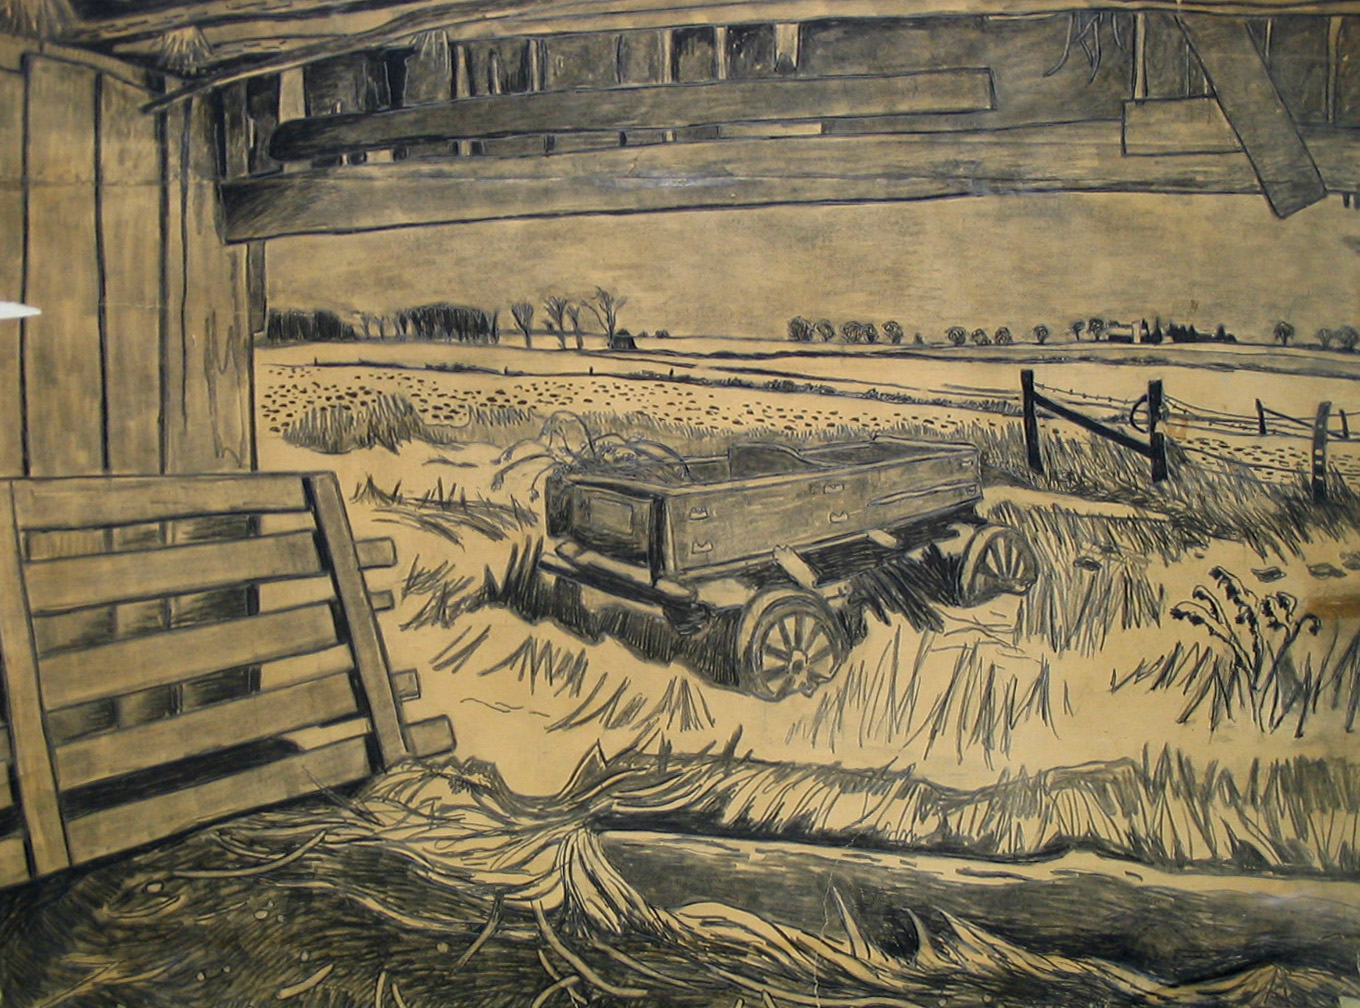 Hay Wagon from the side of the Barn, graphite on newsprint